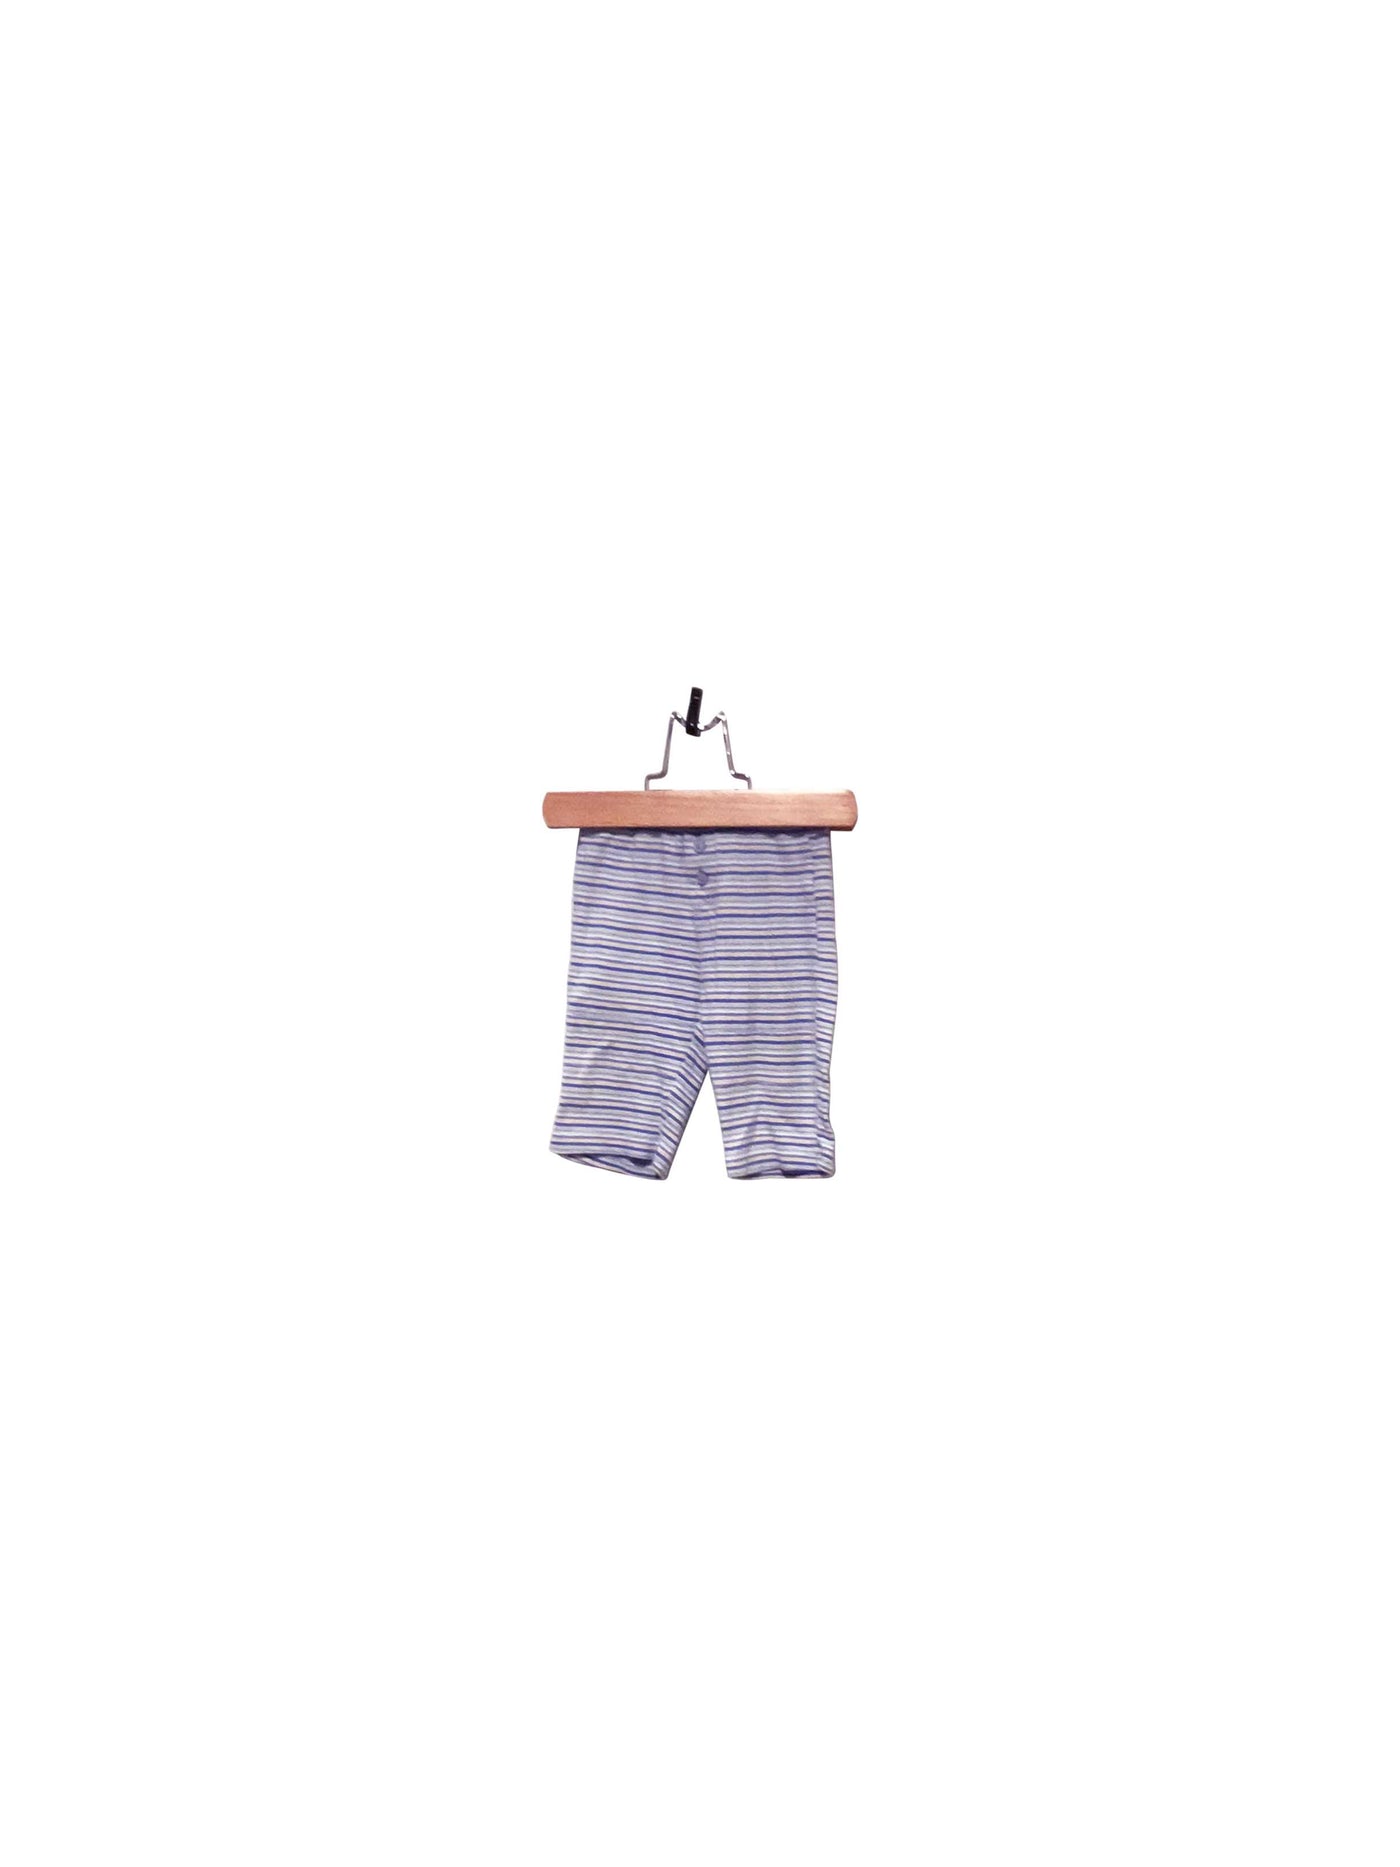 THE CHILDREN'S PLACE Regular fit Pant in Blue  -  3-6M